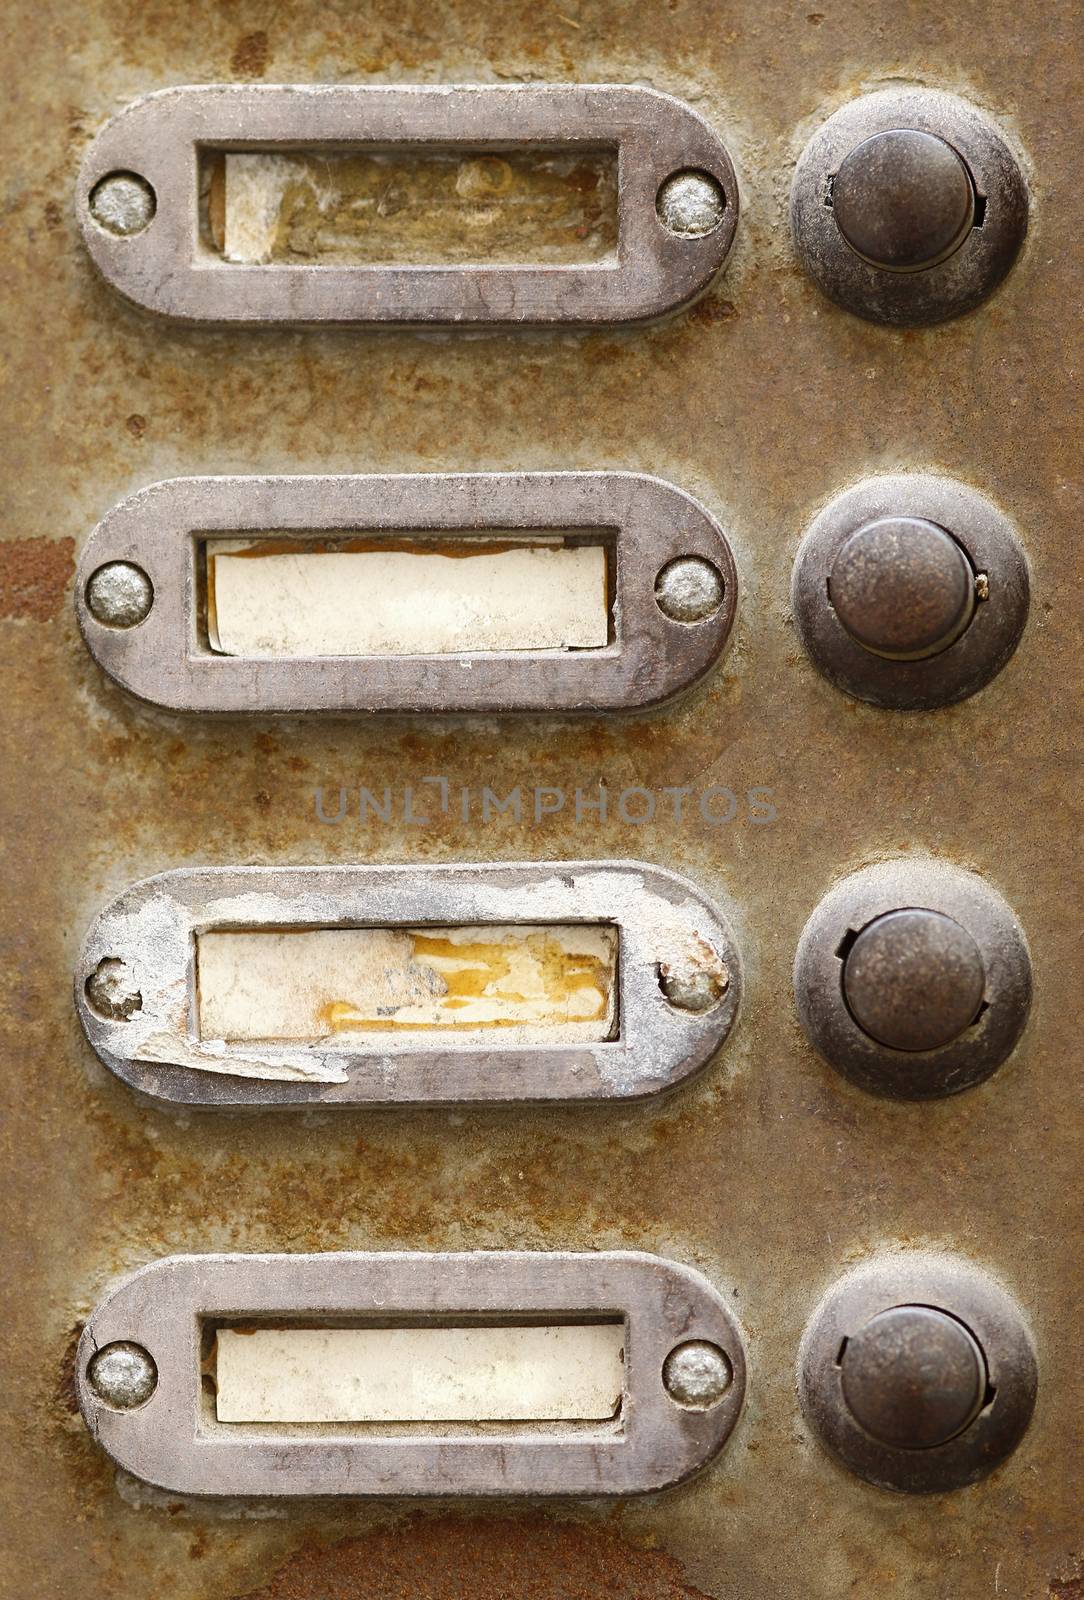 Detail of the old and damaged doorbells - buttons